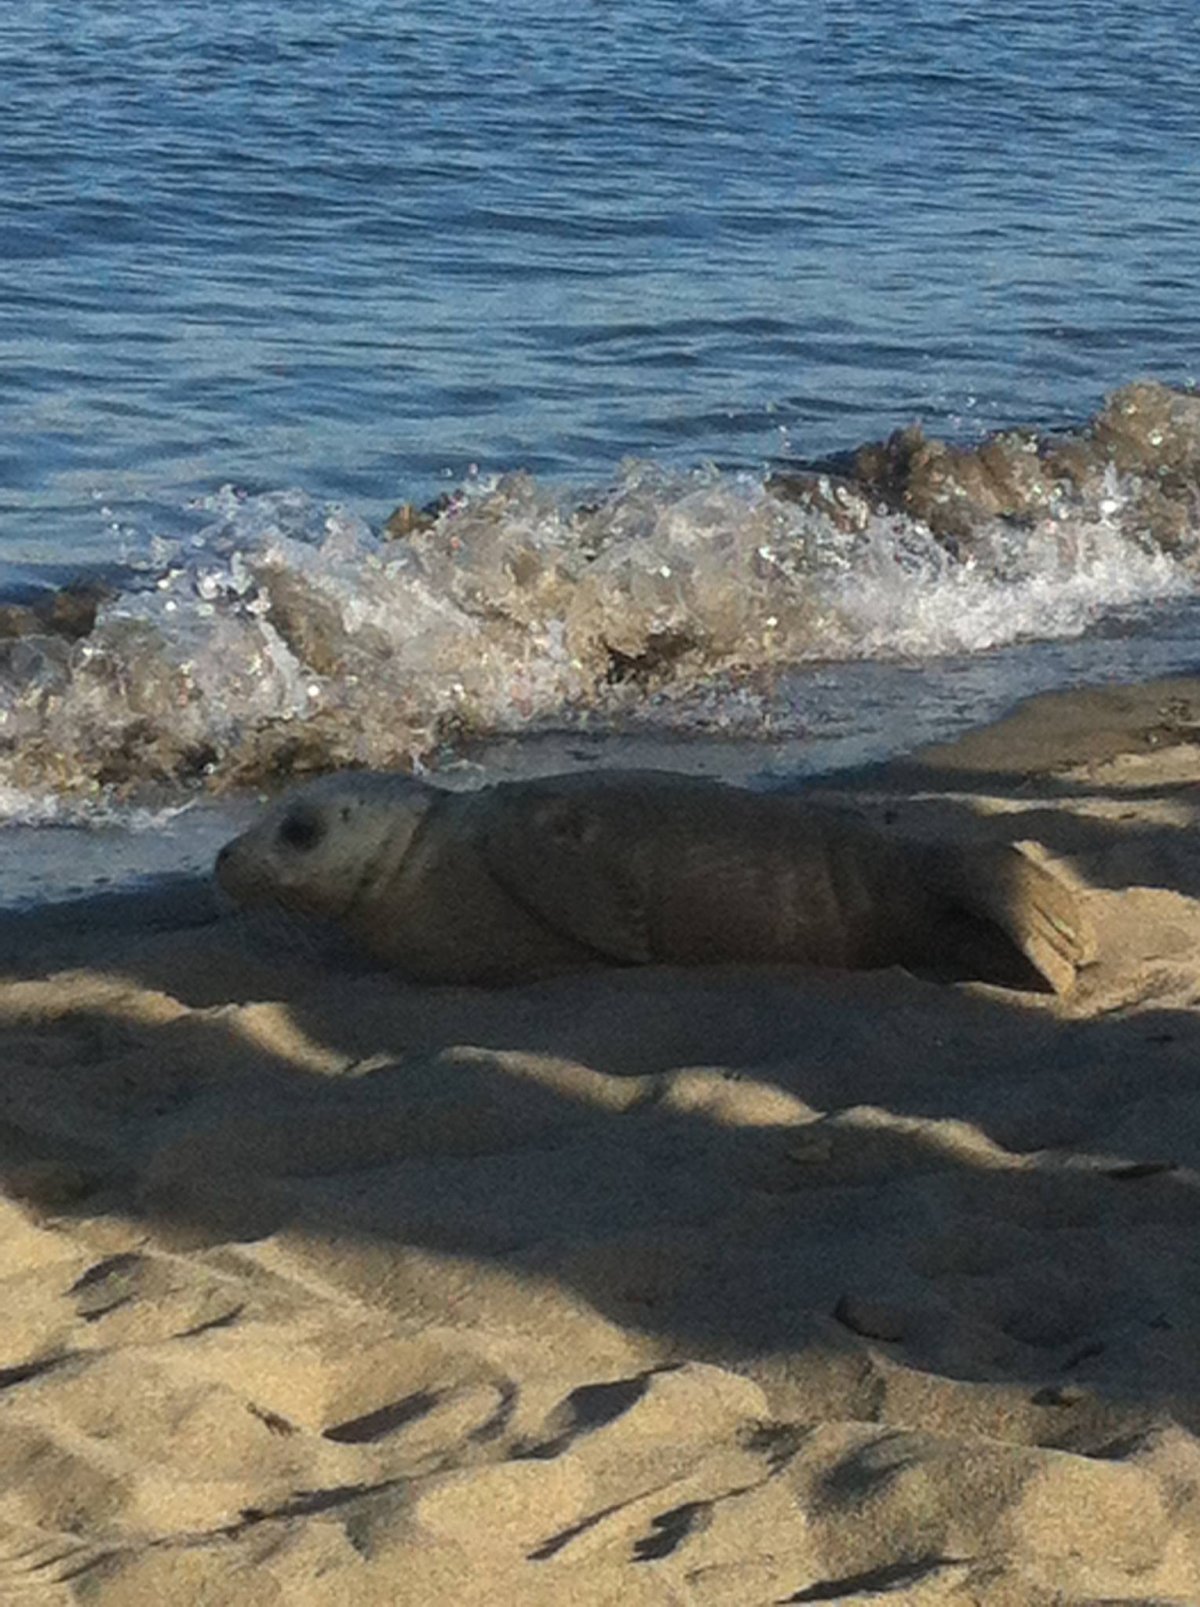 This seal was picked up from the beach Monday night.